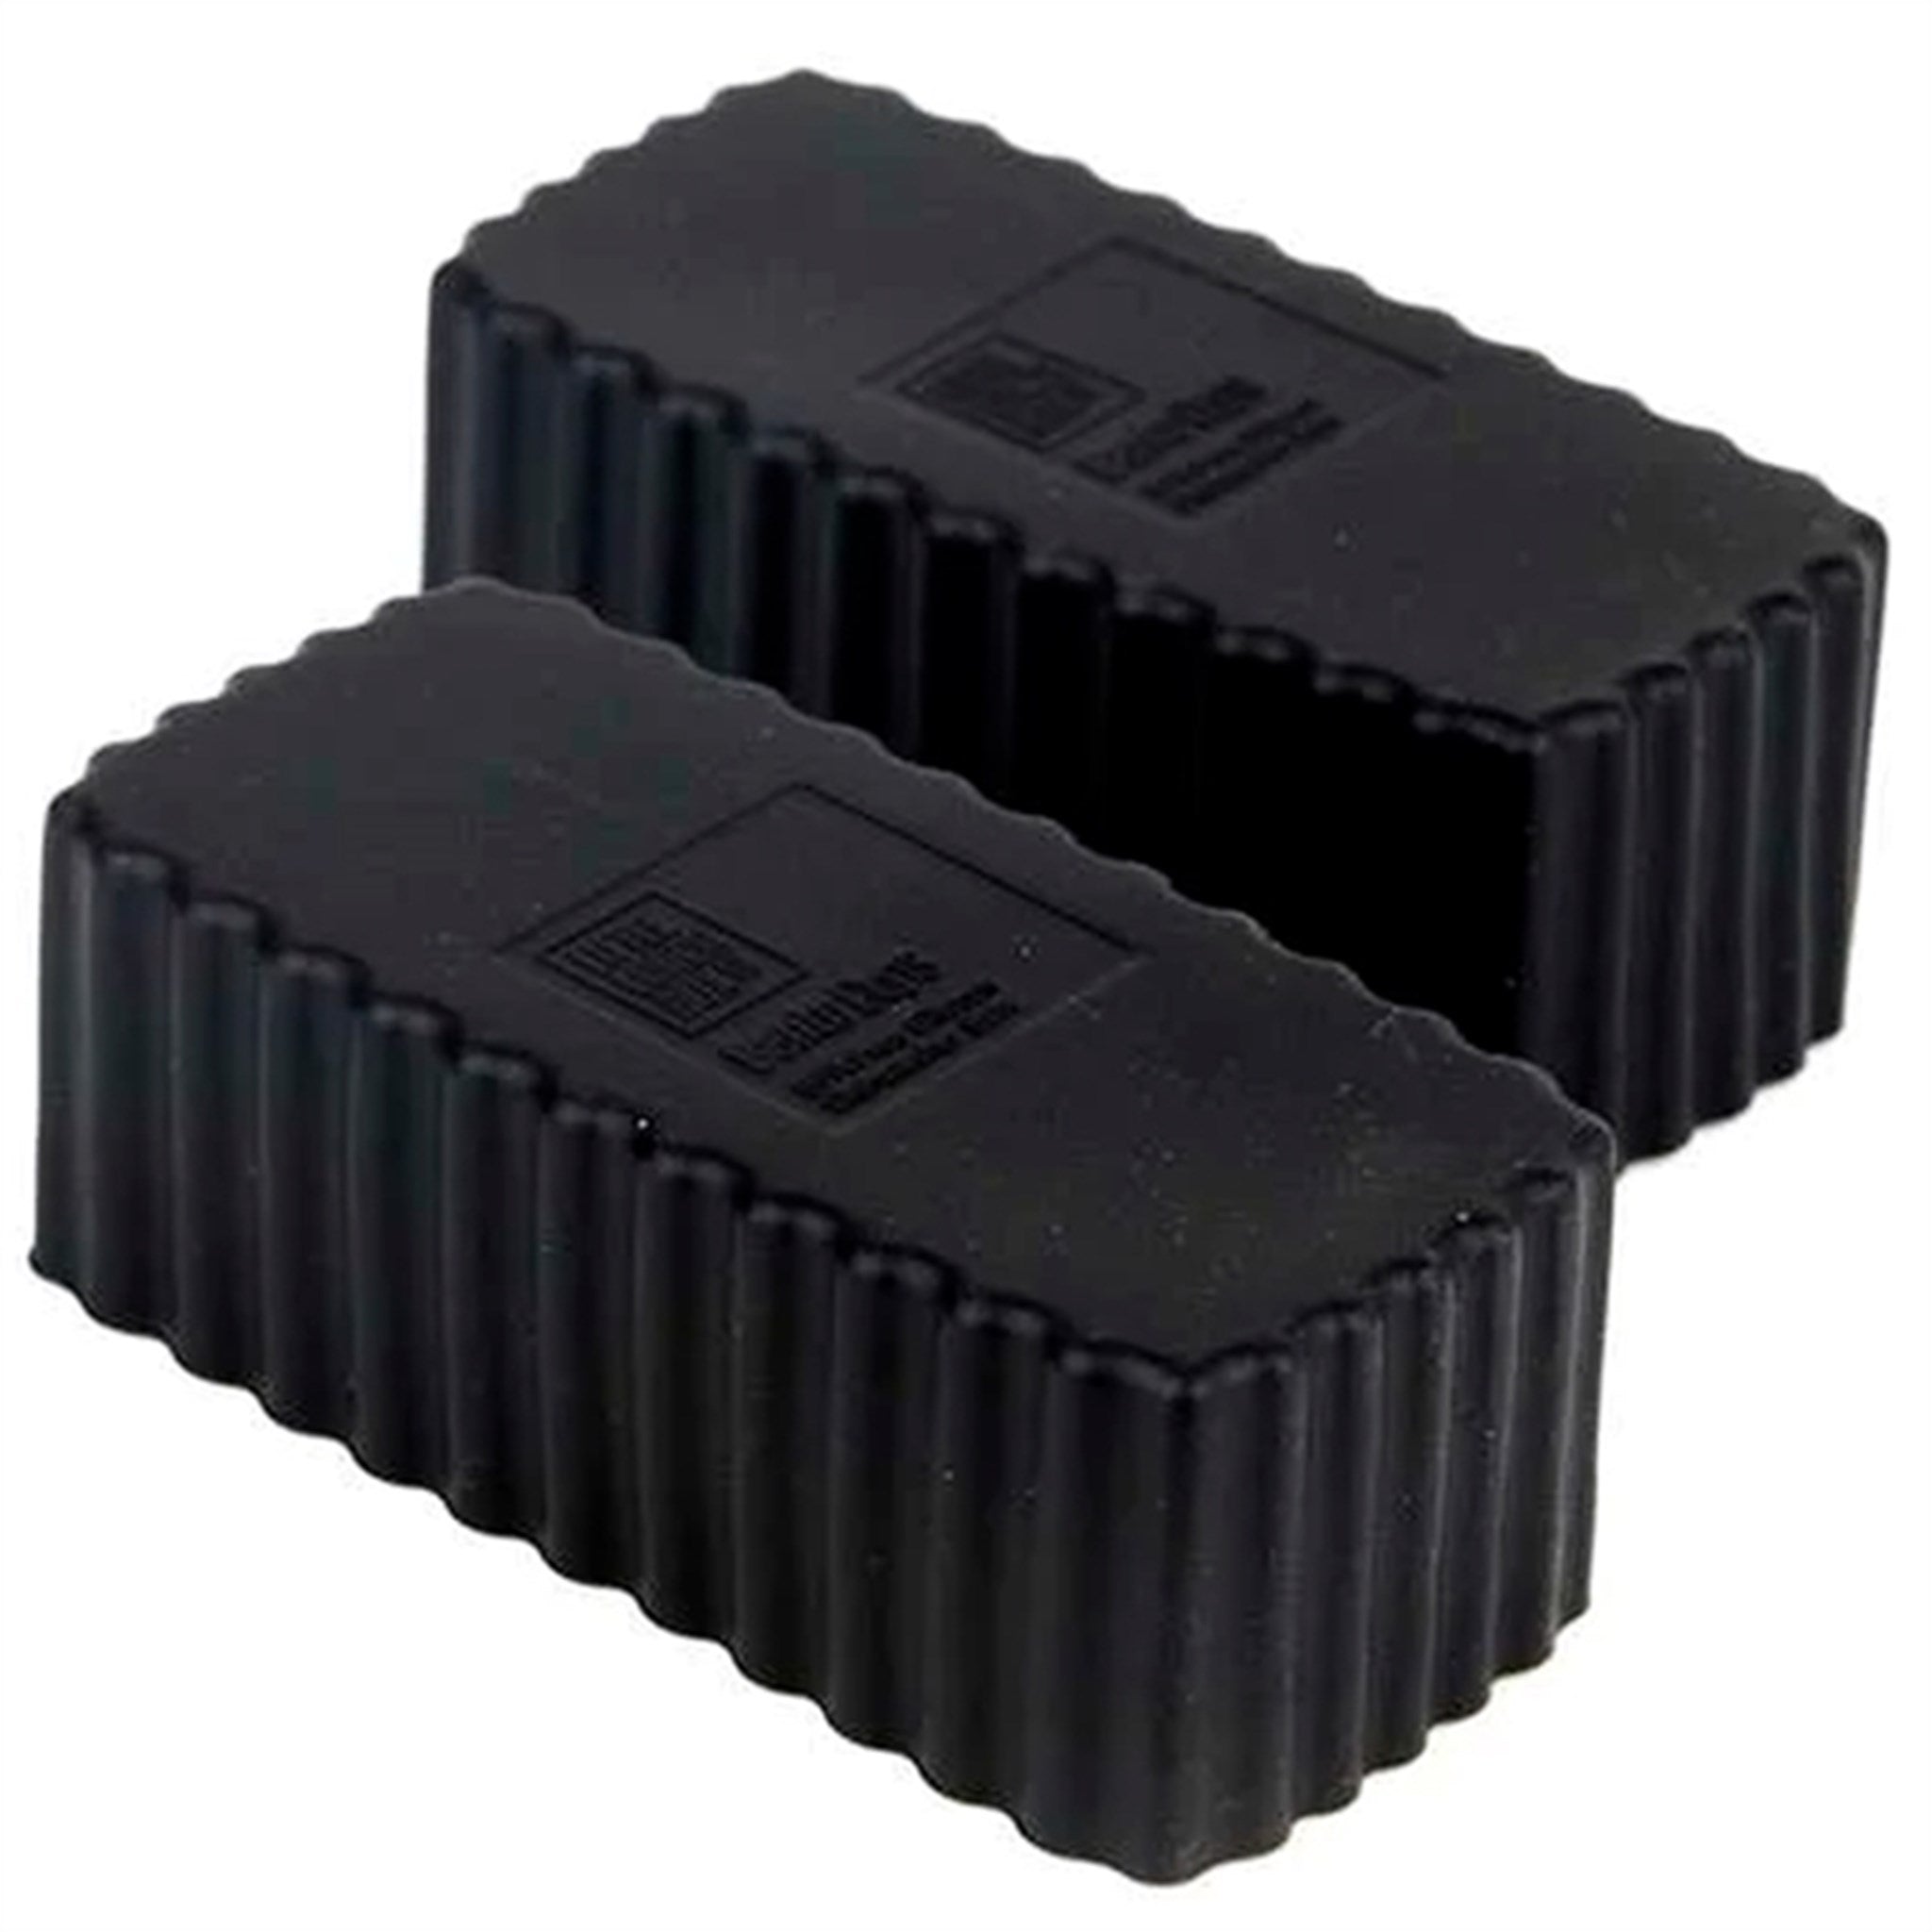 Little Lunch Box Co Bento Silicone Cups Rectangular Black 2